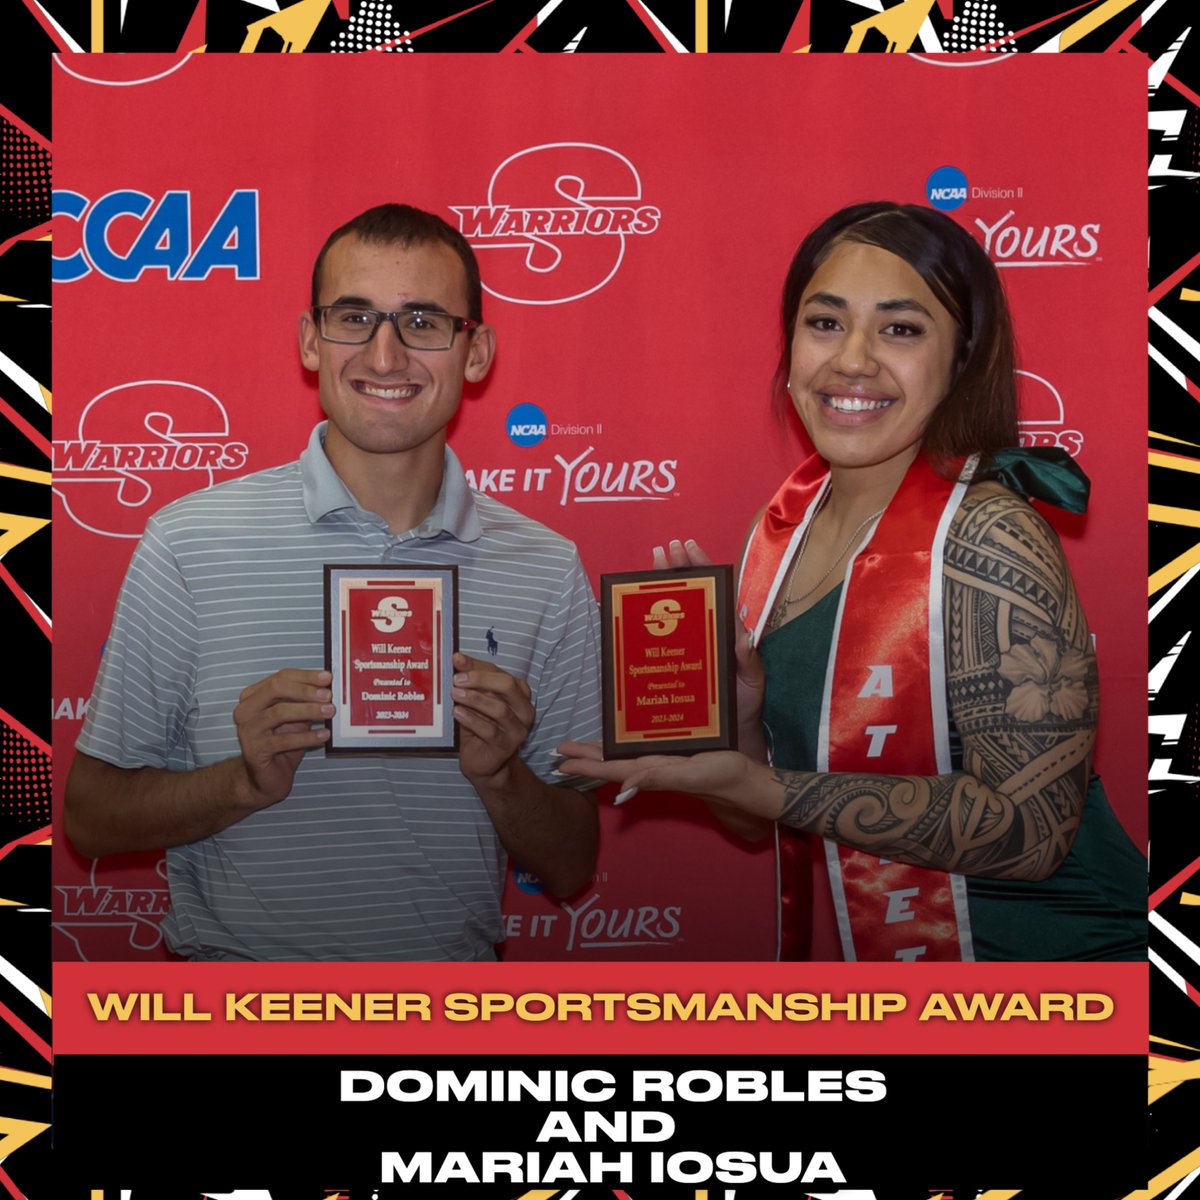 The Will Keener Sportsmanship Award recipients in Dominic Robles and Mariah Iosua. #ValleyTough